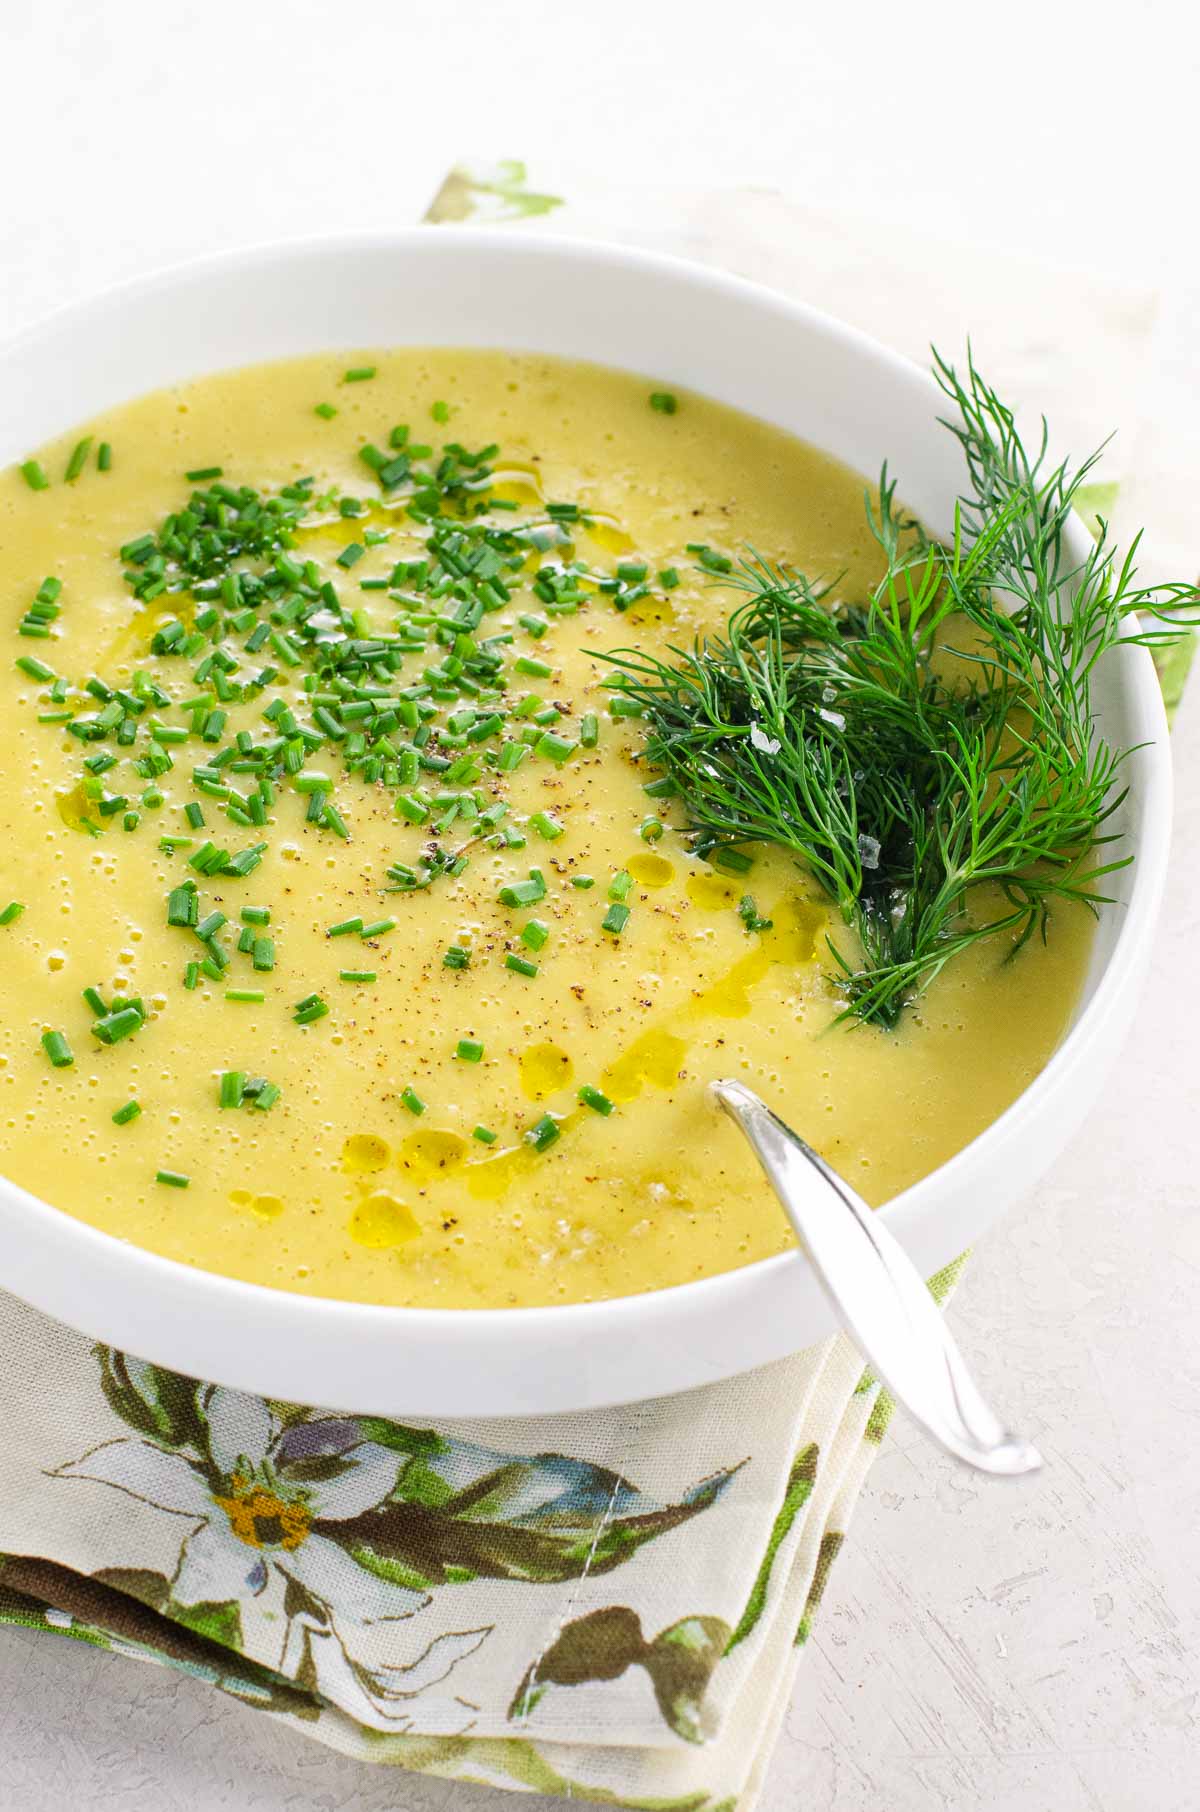 potage parmentier (potato leek soup) in a white bowl garnished with dill and chopped chives